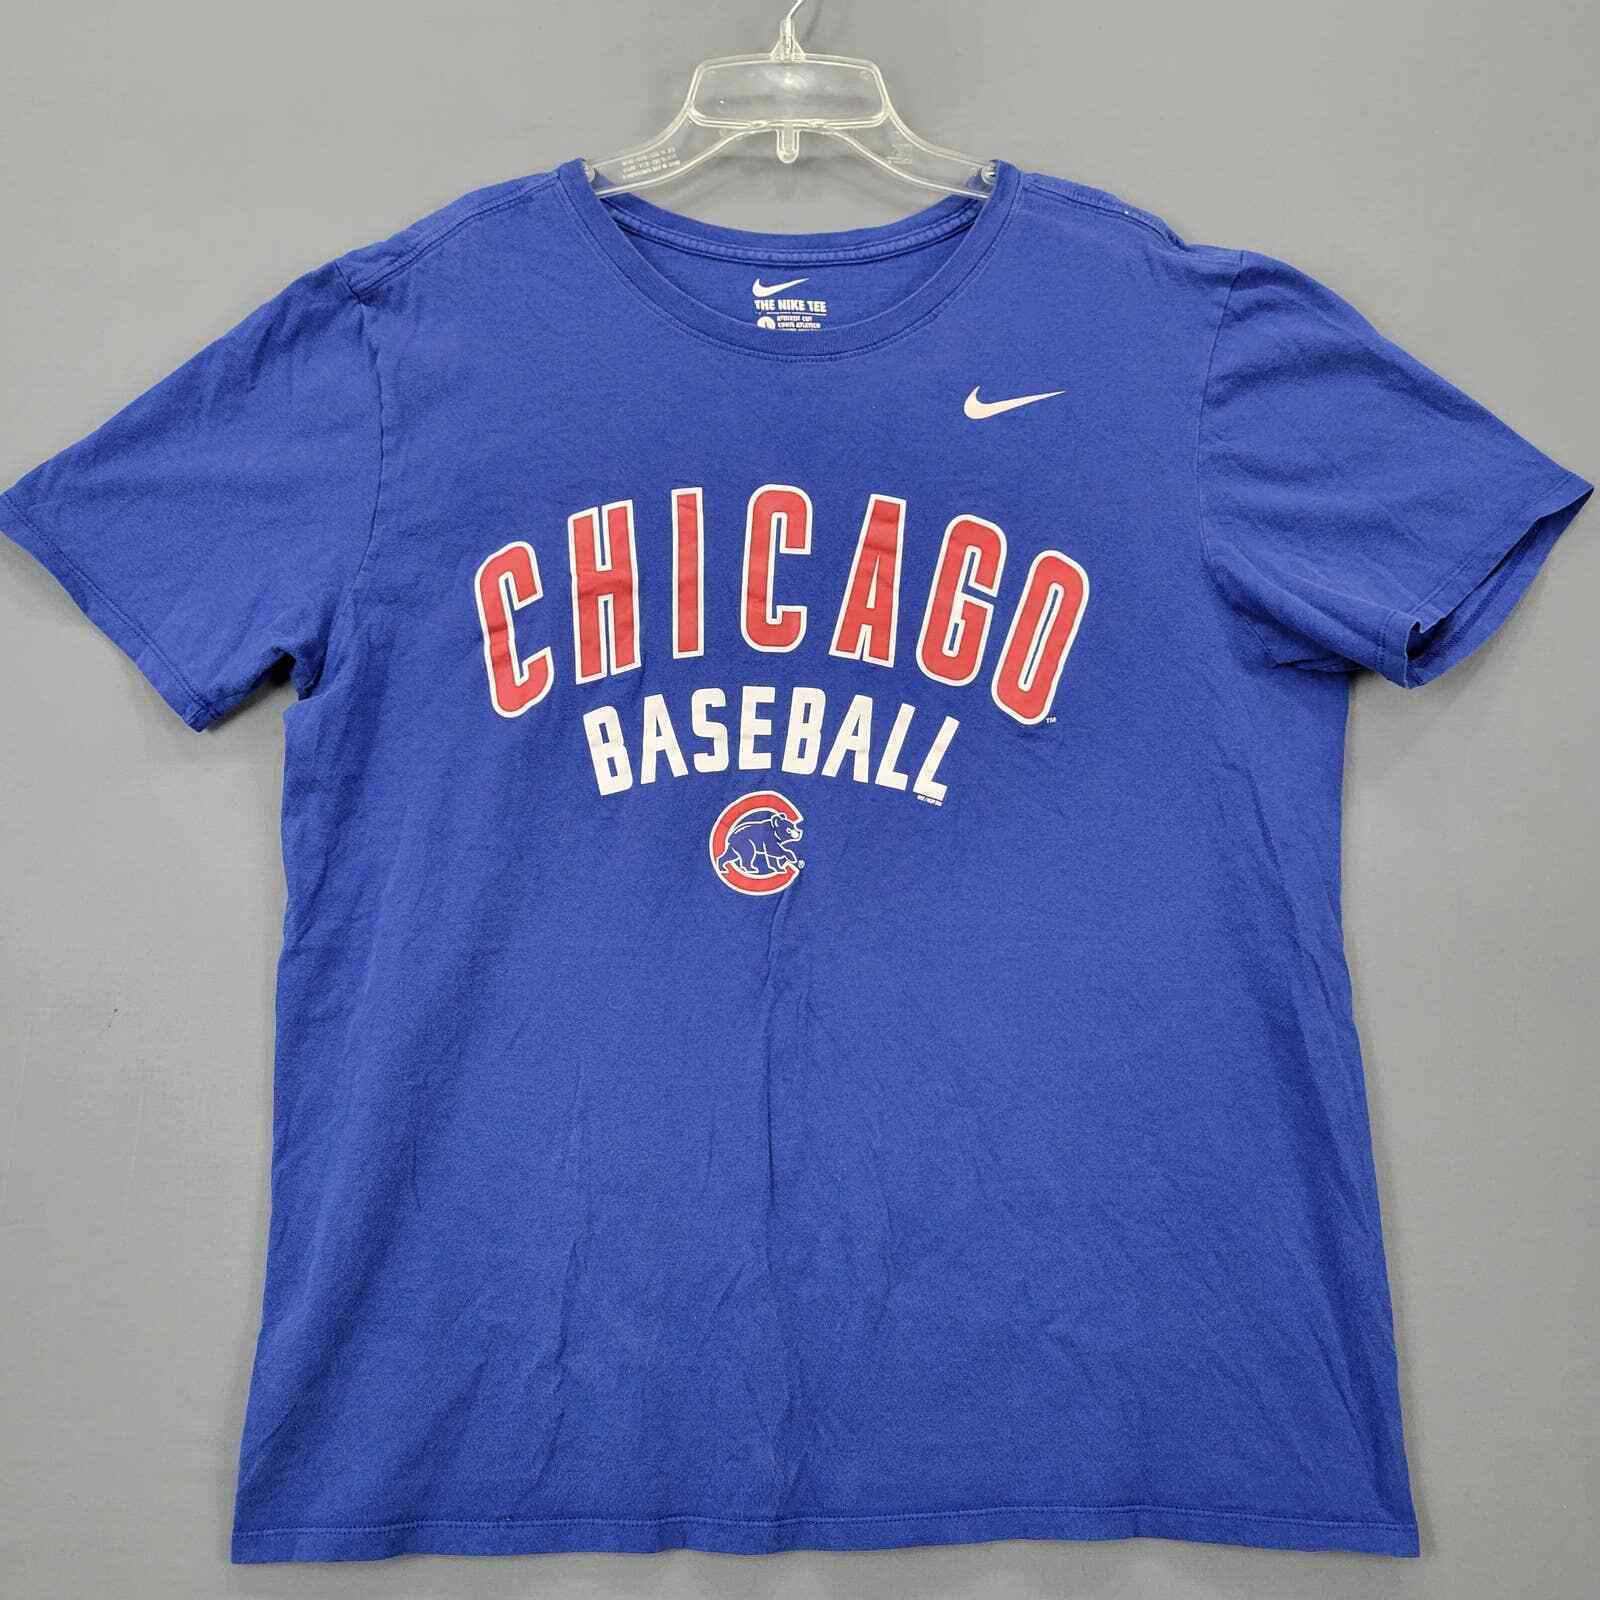 Primary image for Nike Mens Shirt Size L Chicago Cubs Baseball Short Sleeve Athletic Cut Tee Logo